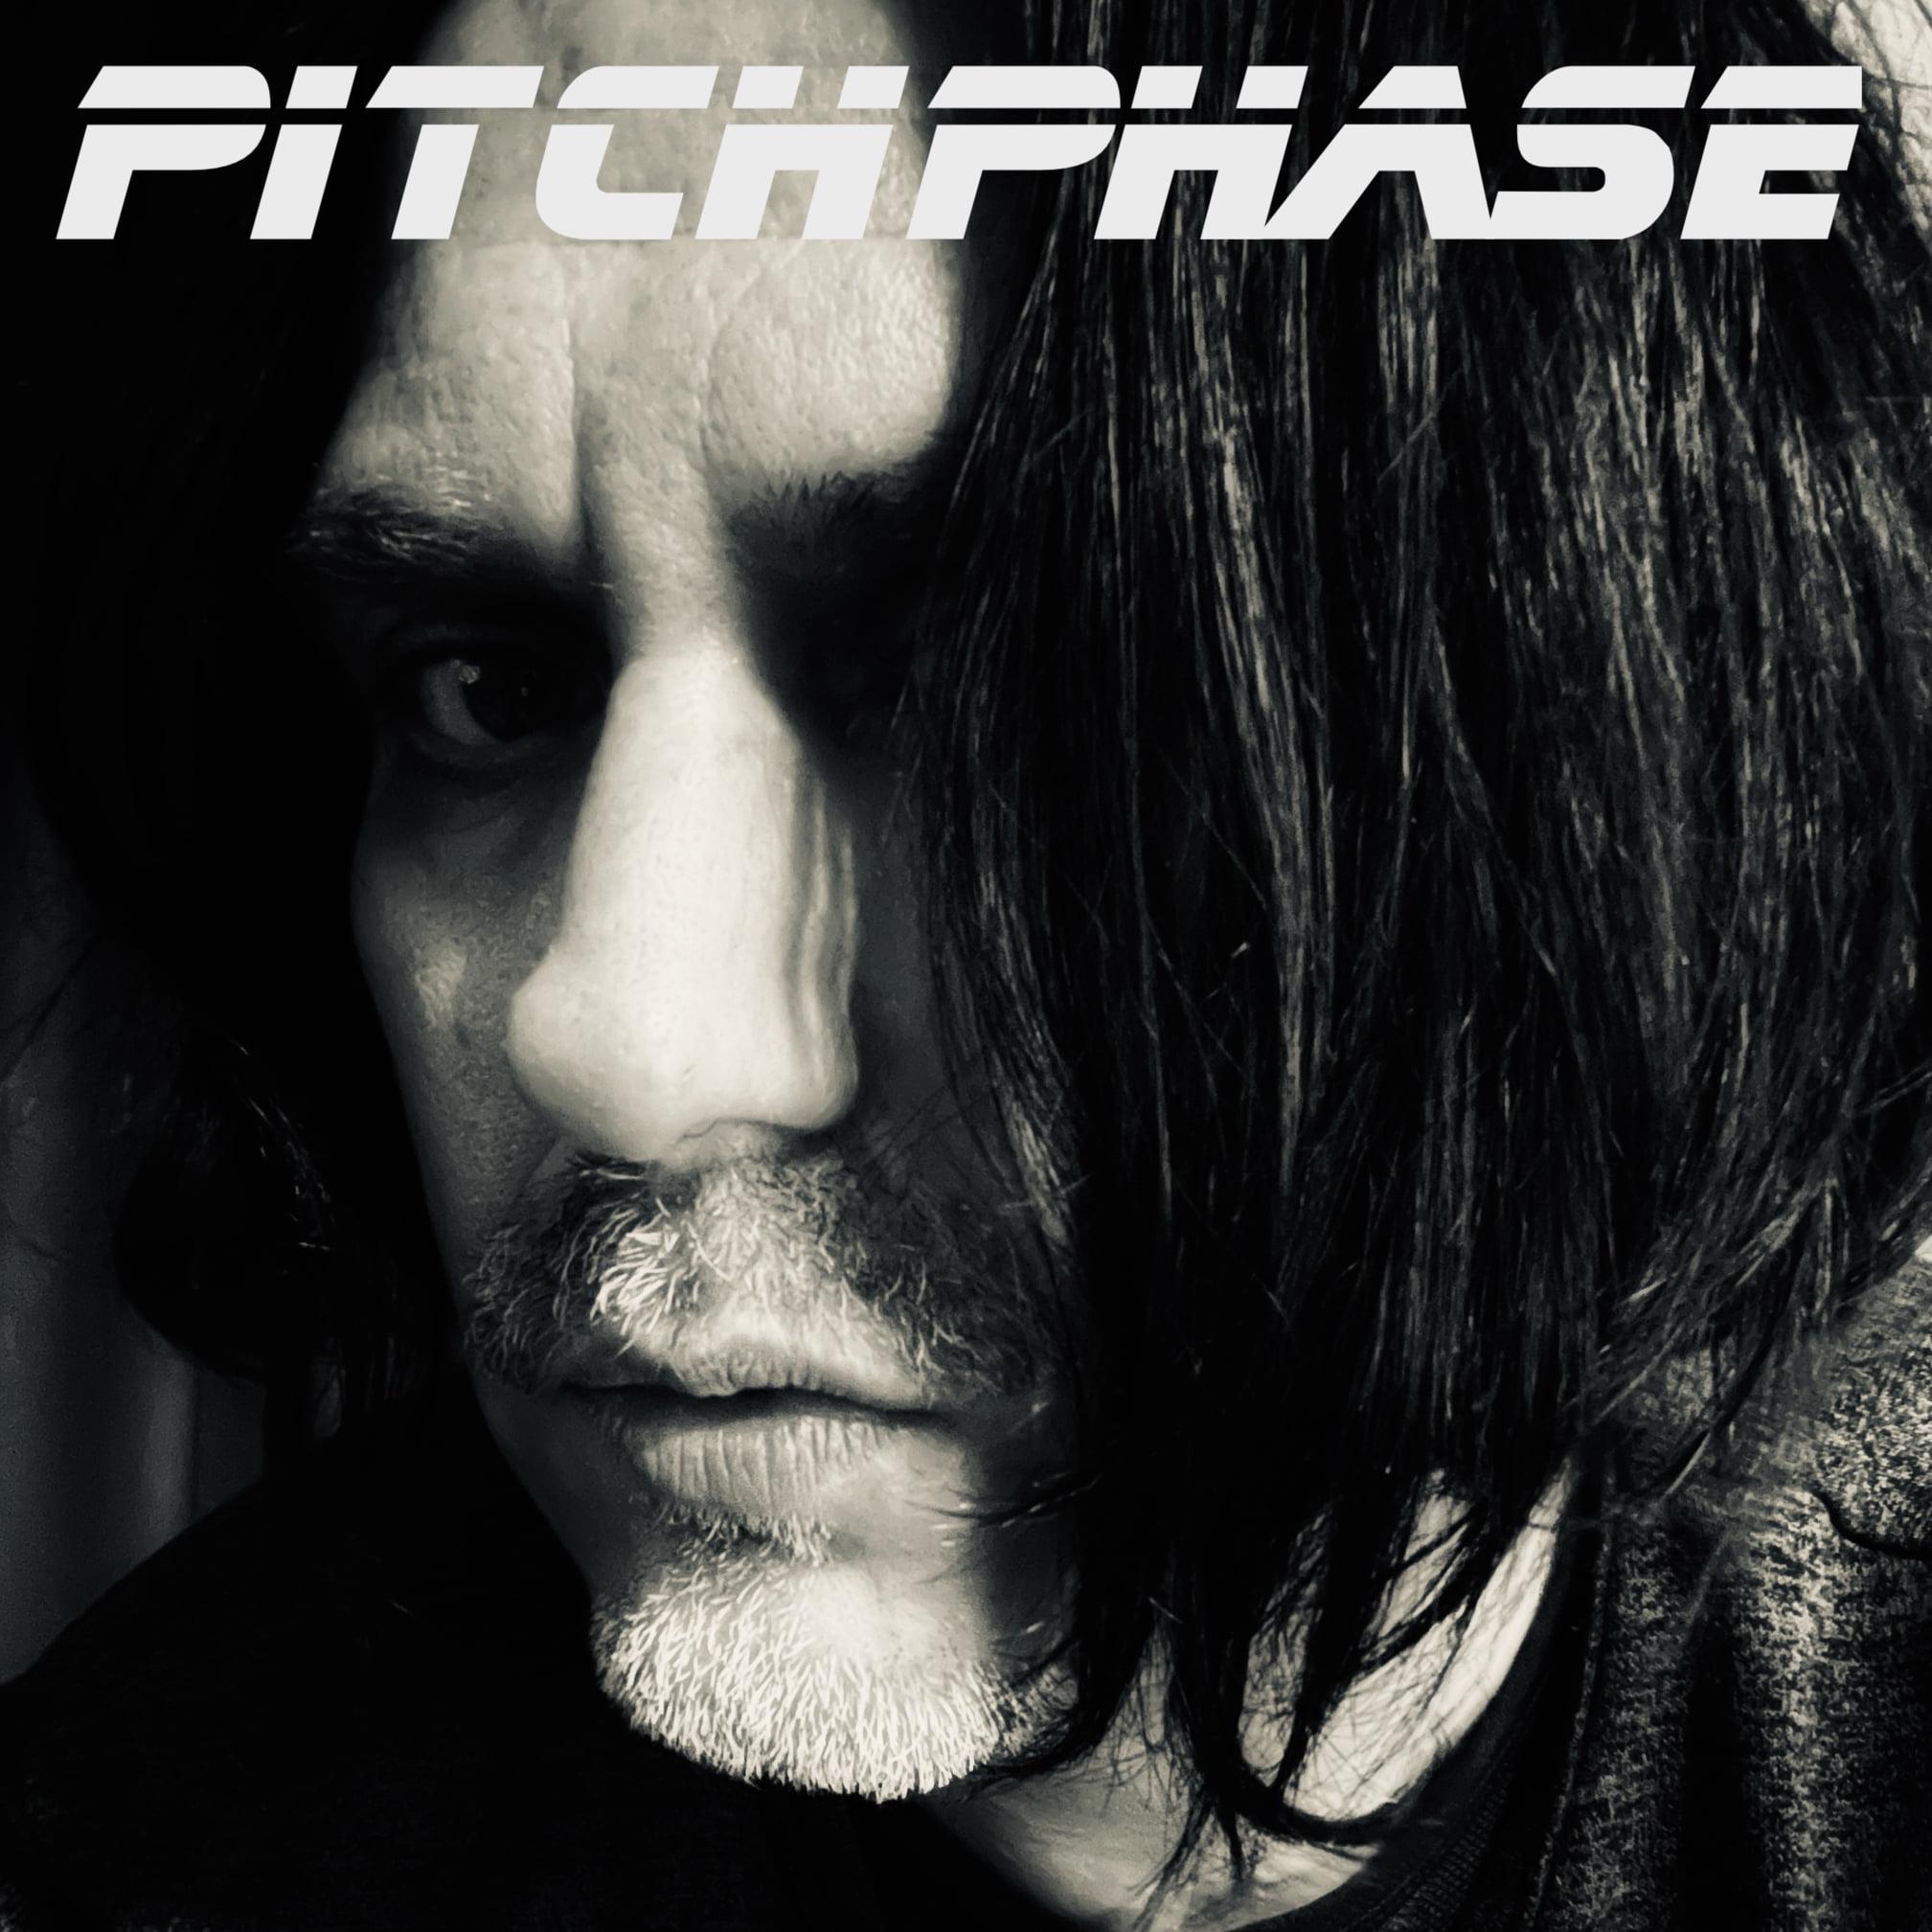 Pitchphase